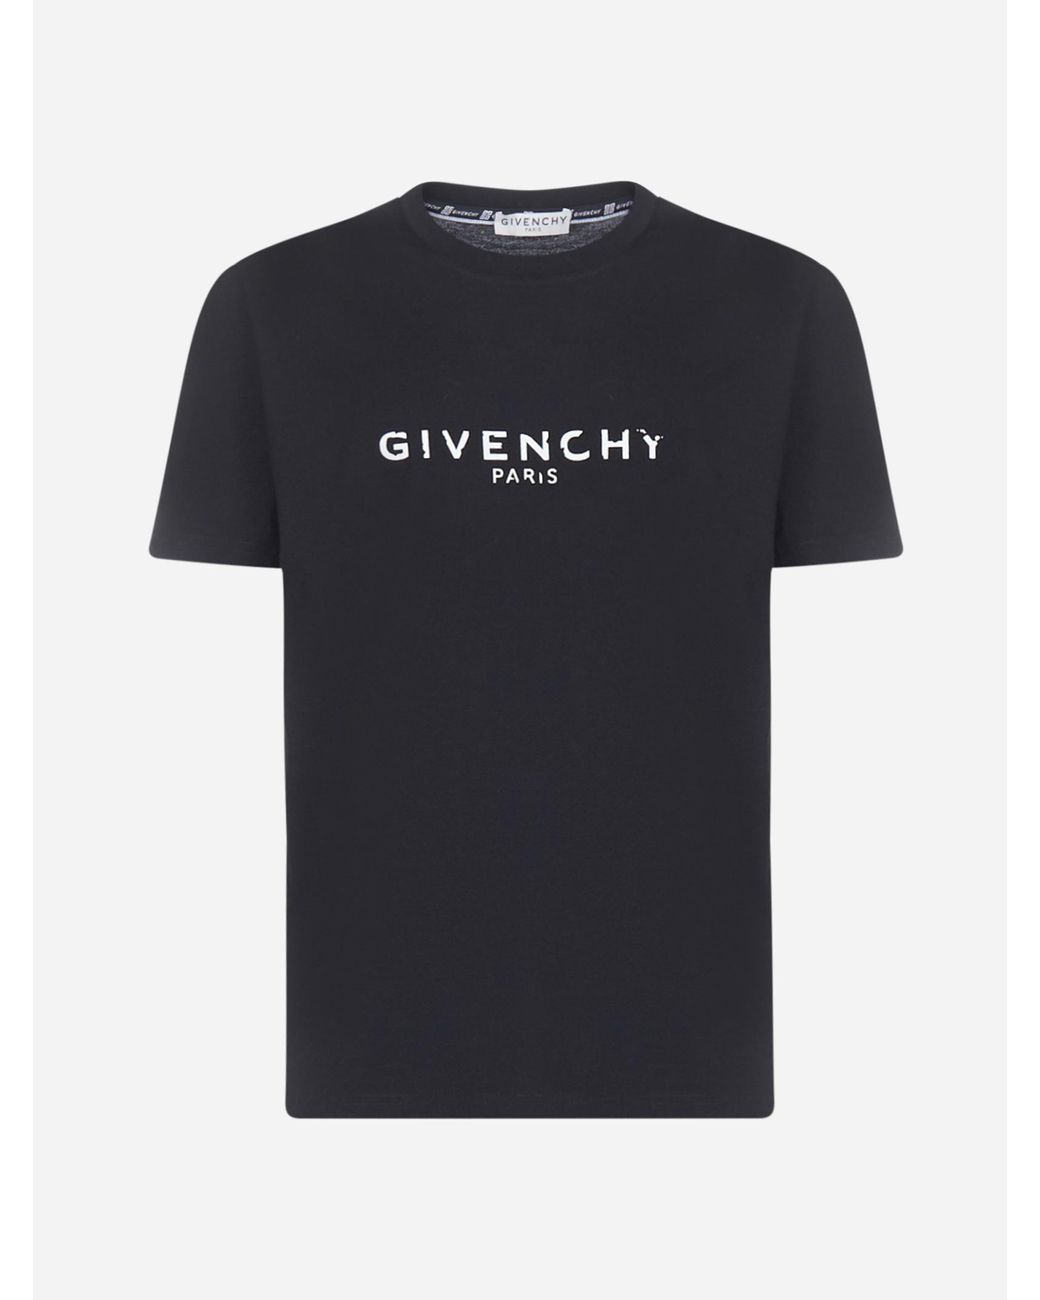 Givenchy Cotton Distressed Logo T-shirt Black Fw19 for Men - Save 37% ...